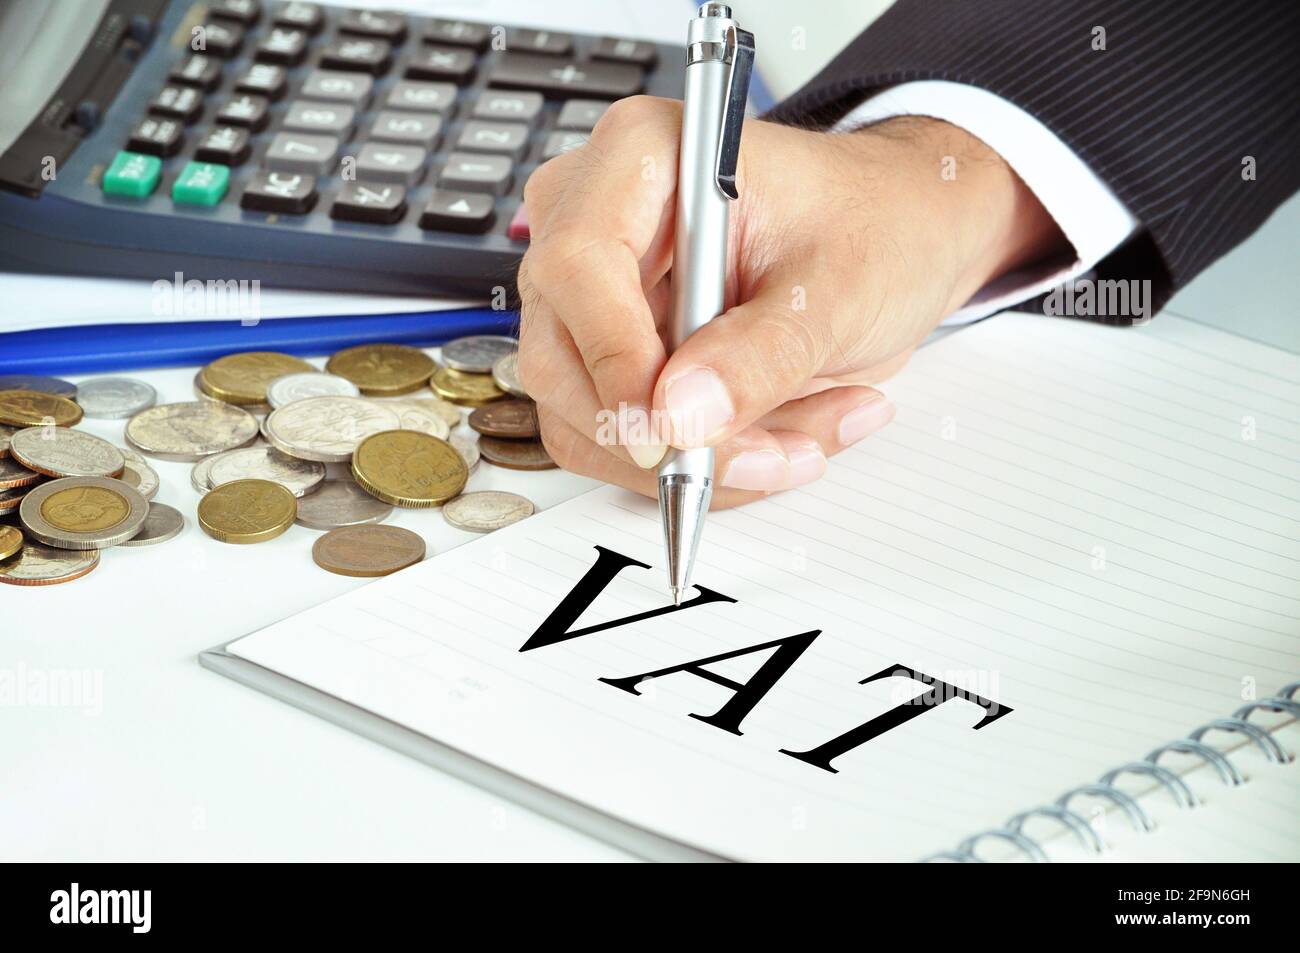 Hand with pen pointing to VAT (or Value Added Tax) sign on the paper - commercial & taxation concept Stock Photo